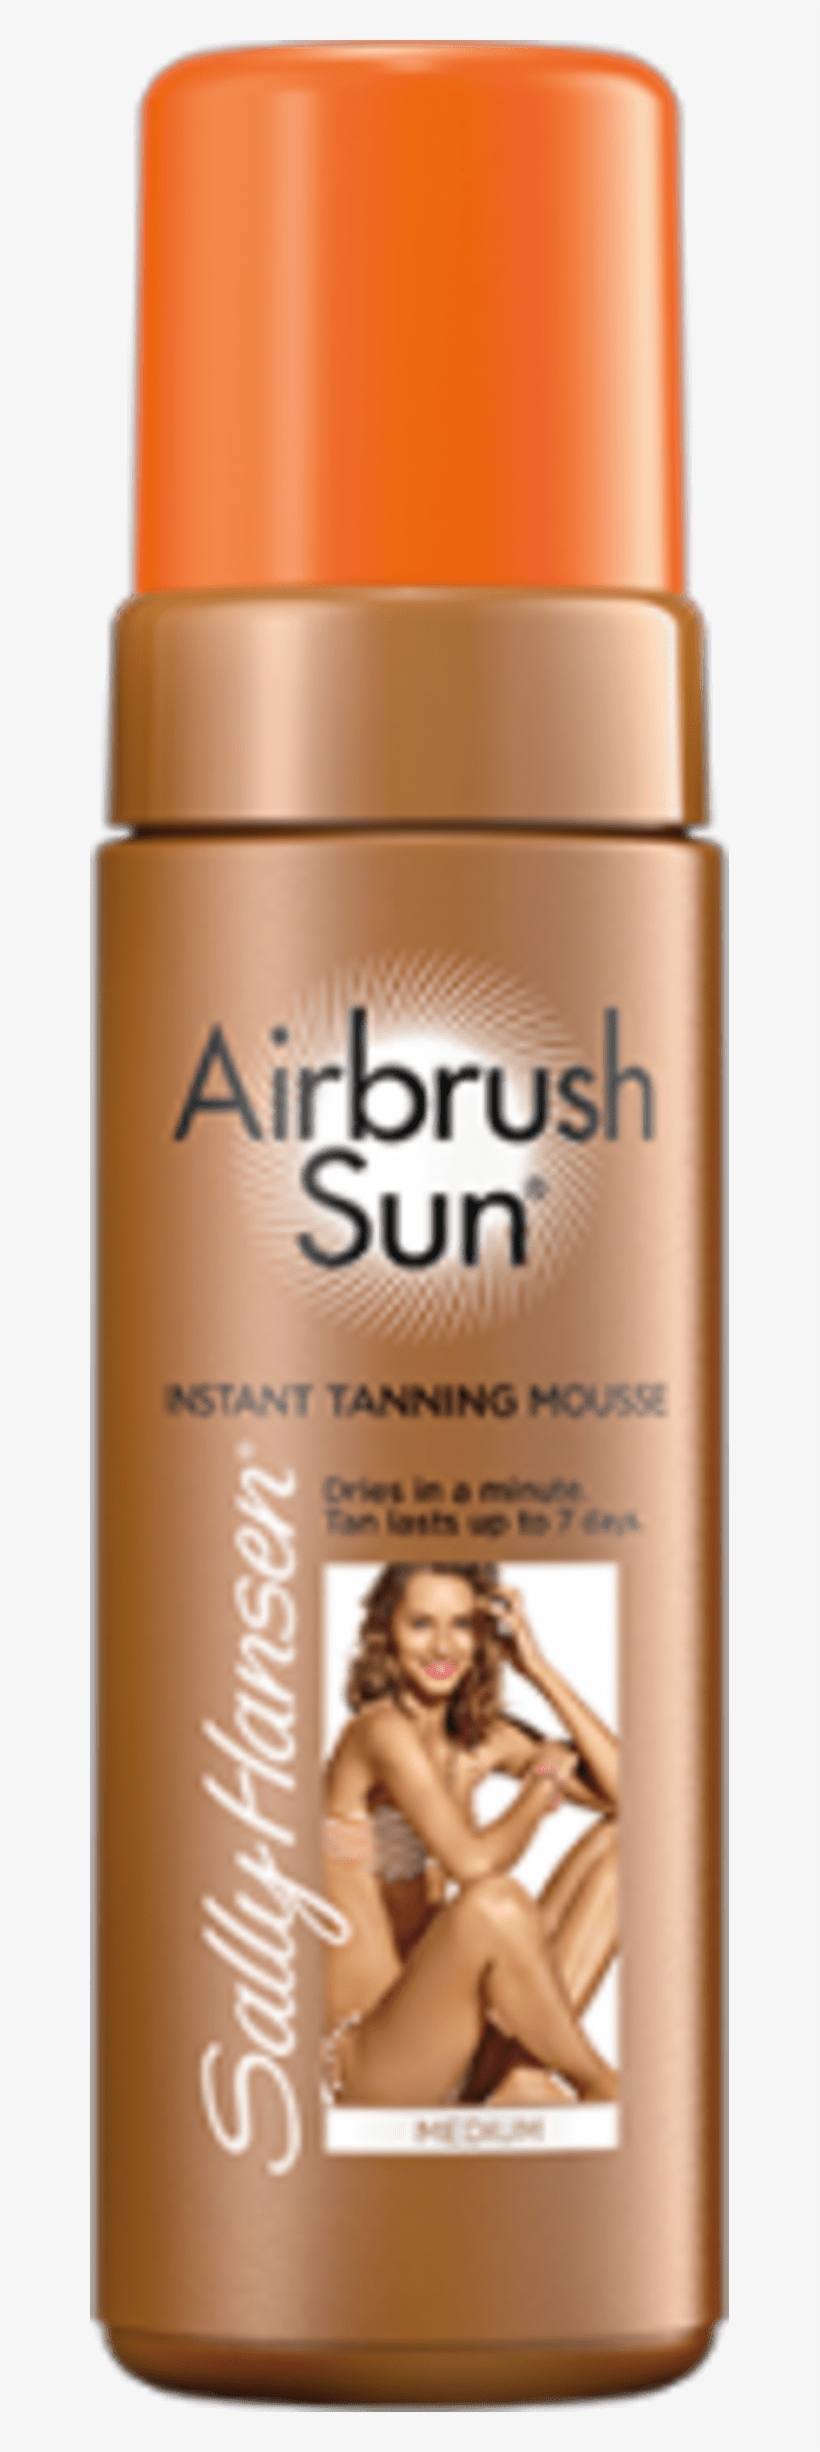 Sally Hansen Airbrush Sun Instant Tanning Mousse, transparent png #4296547